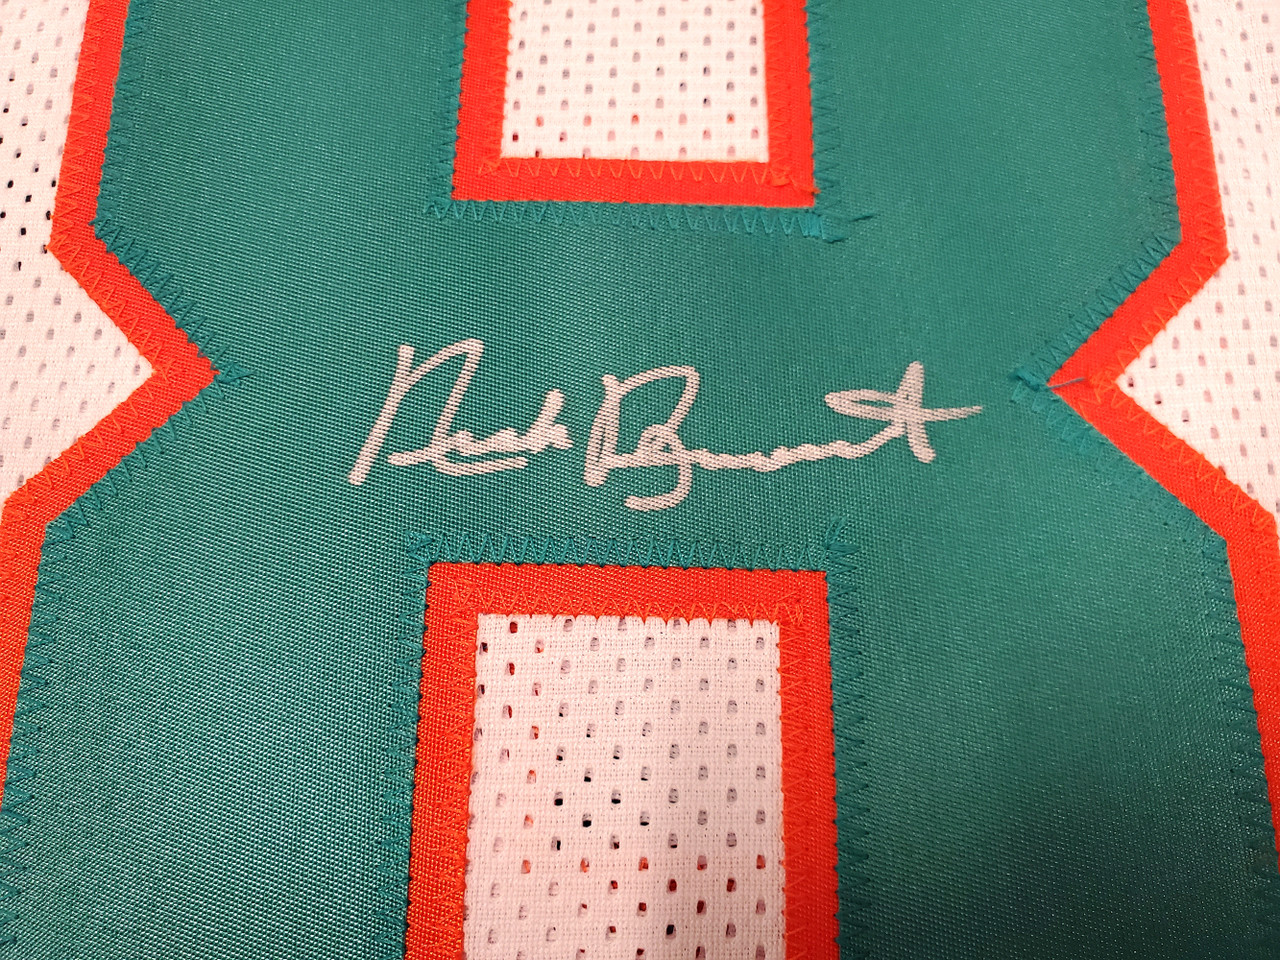 Miami Dolphins Nick Buoniconti Autographed White Jersey HOF 01 PSA/DNA  Stock #197010